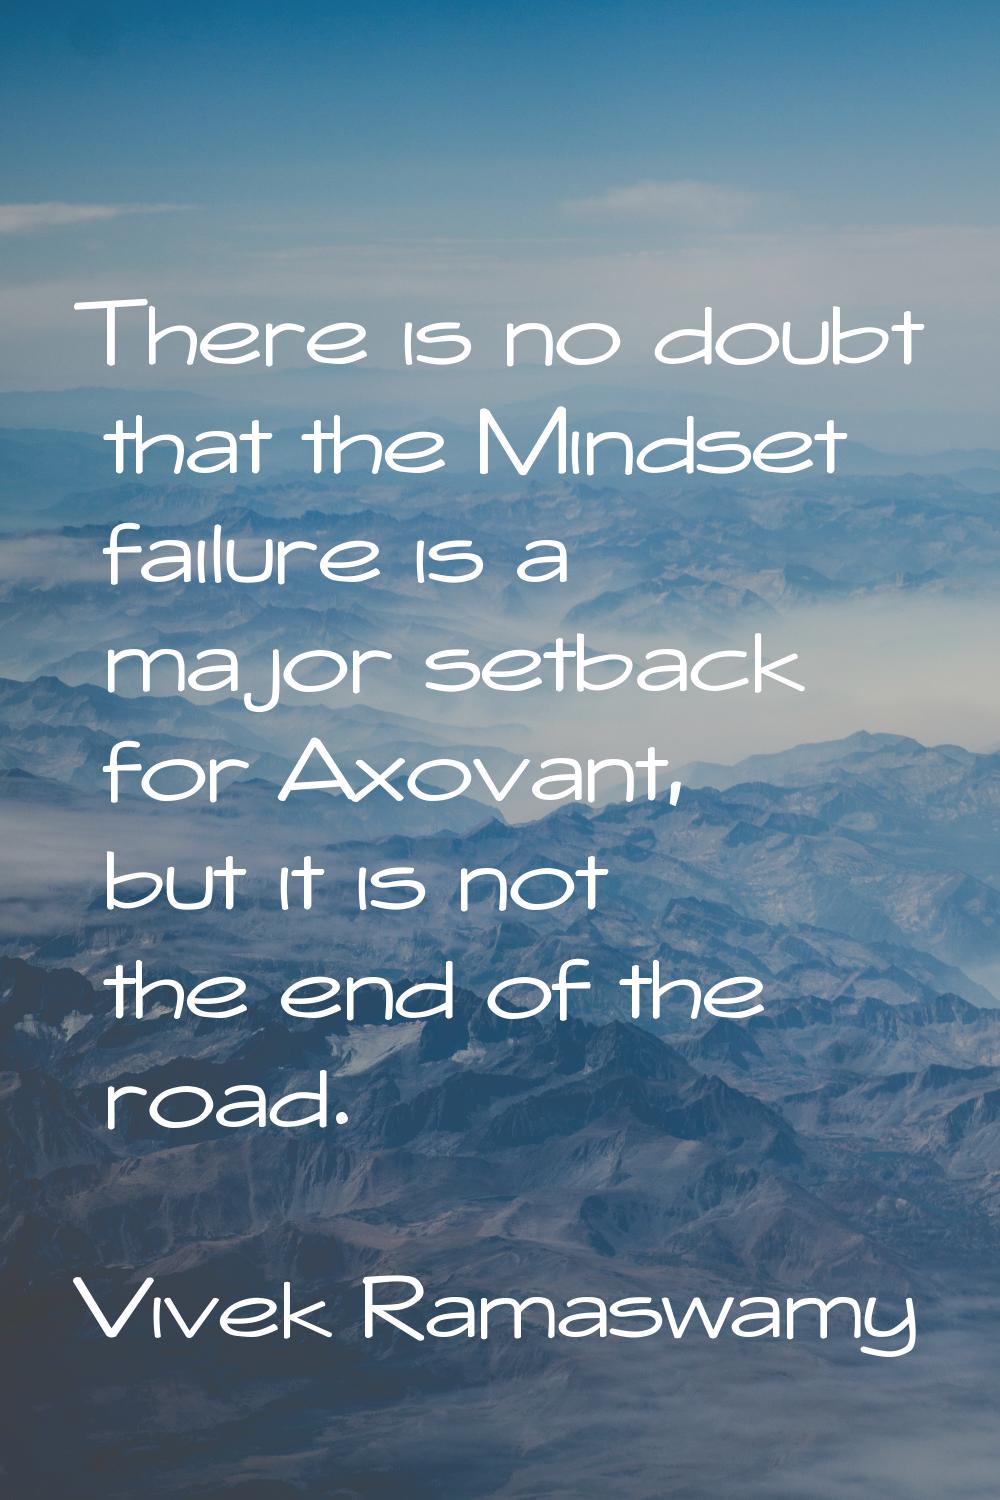 There is no doubt that the Mindset failure is a major setback for Axovant, but it is not the end of